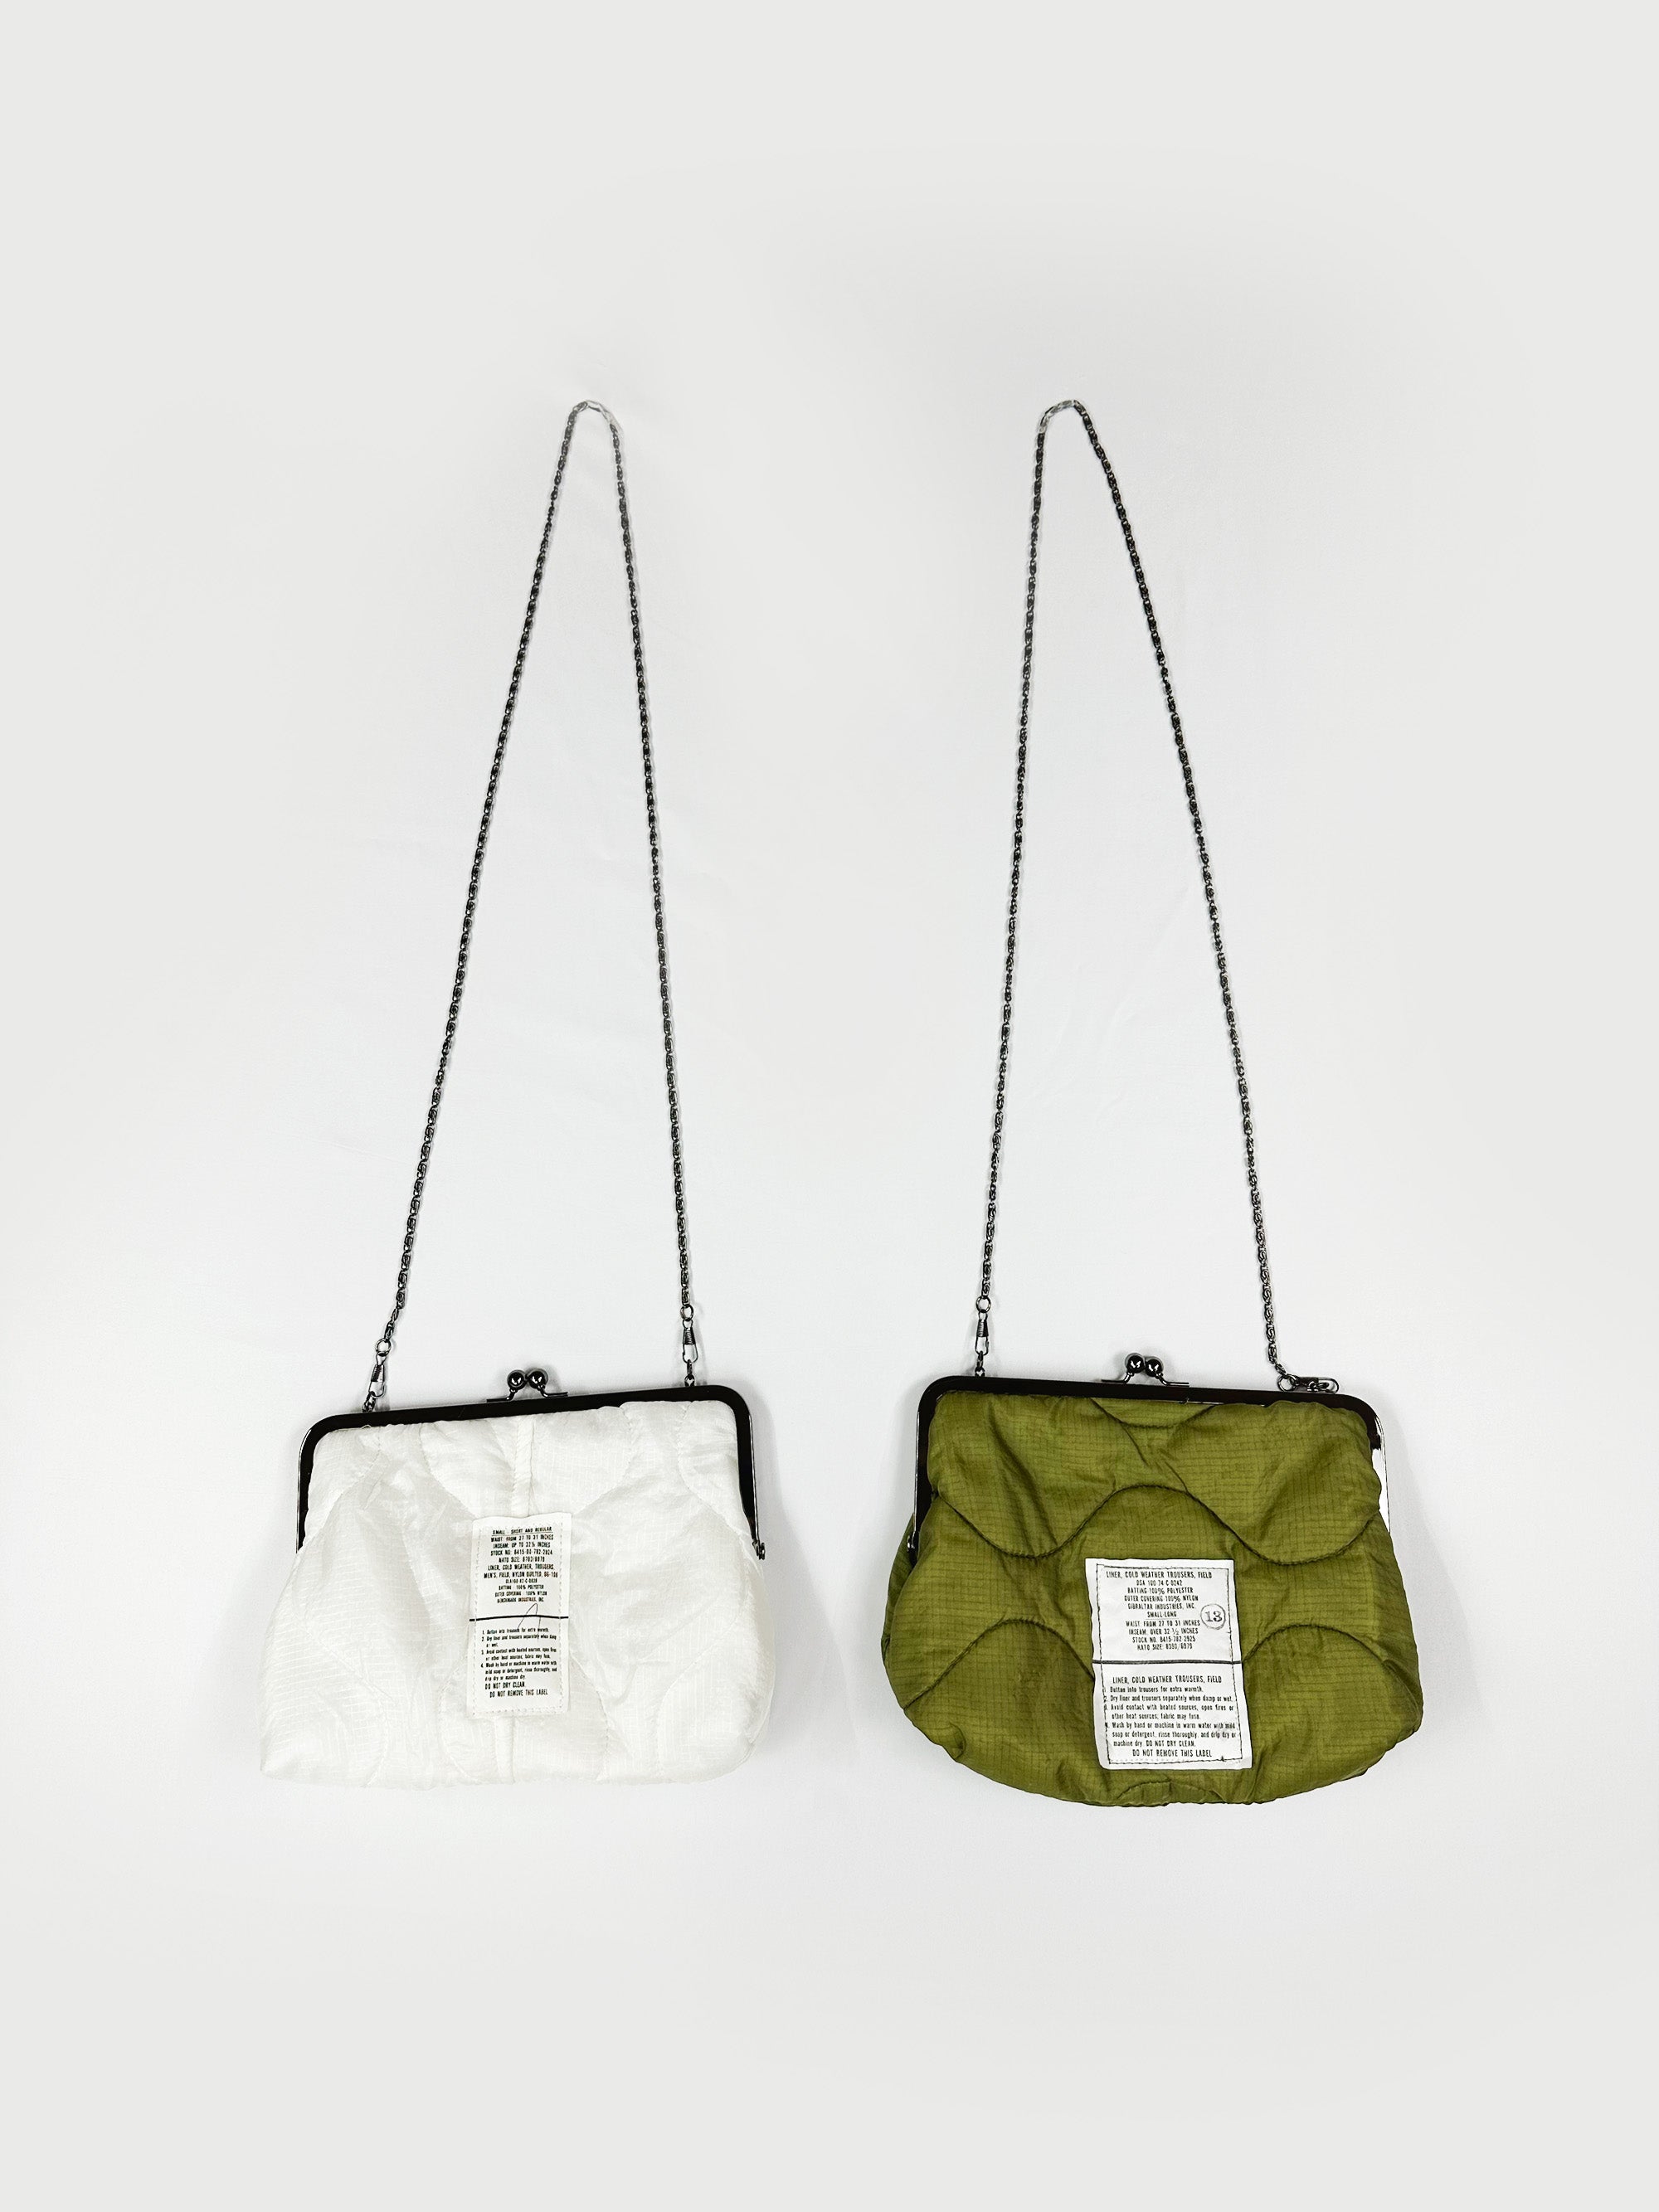 Up cycle liner clasp bag